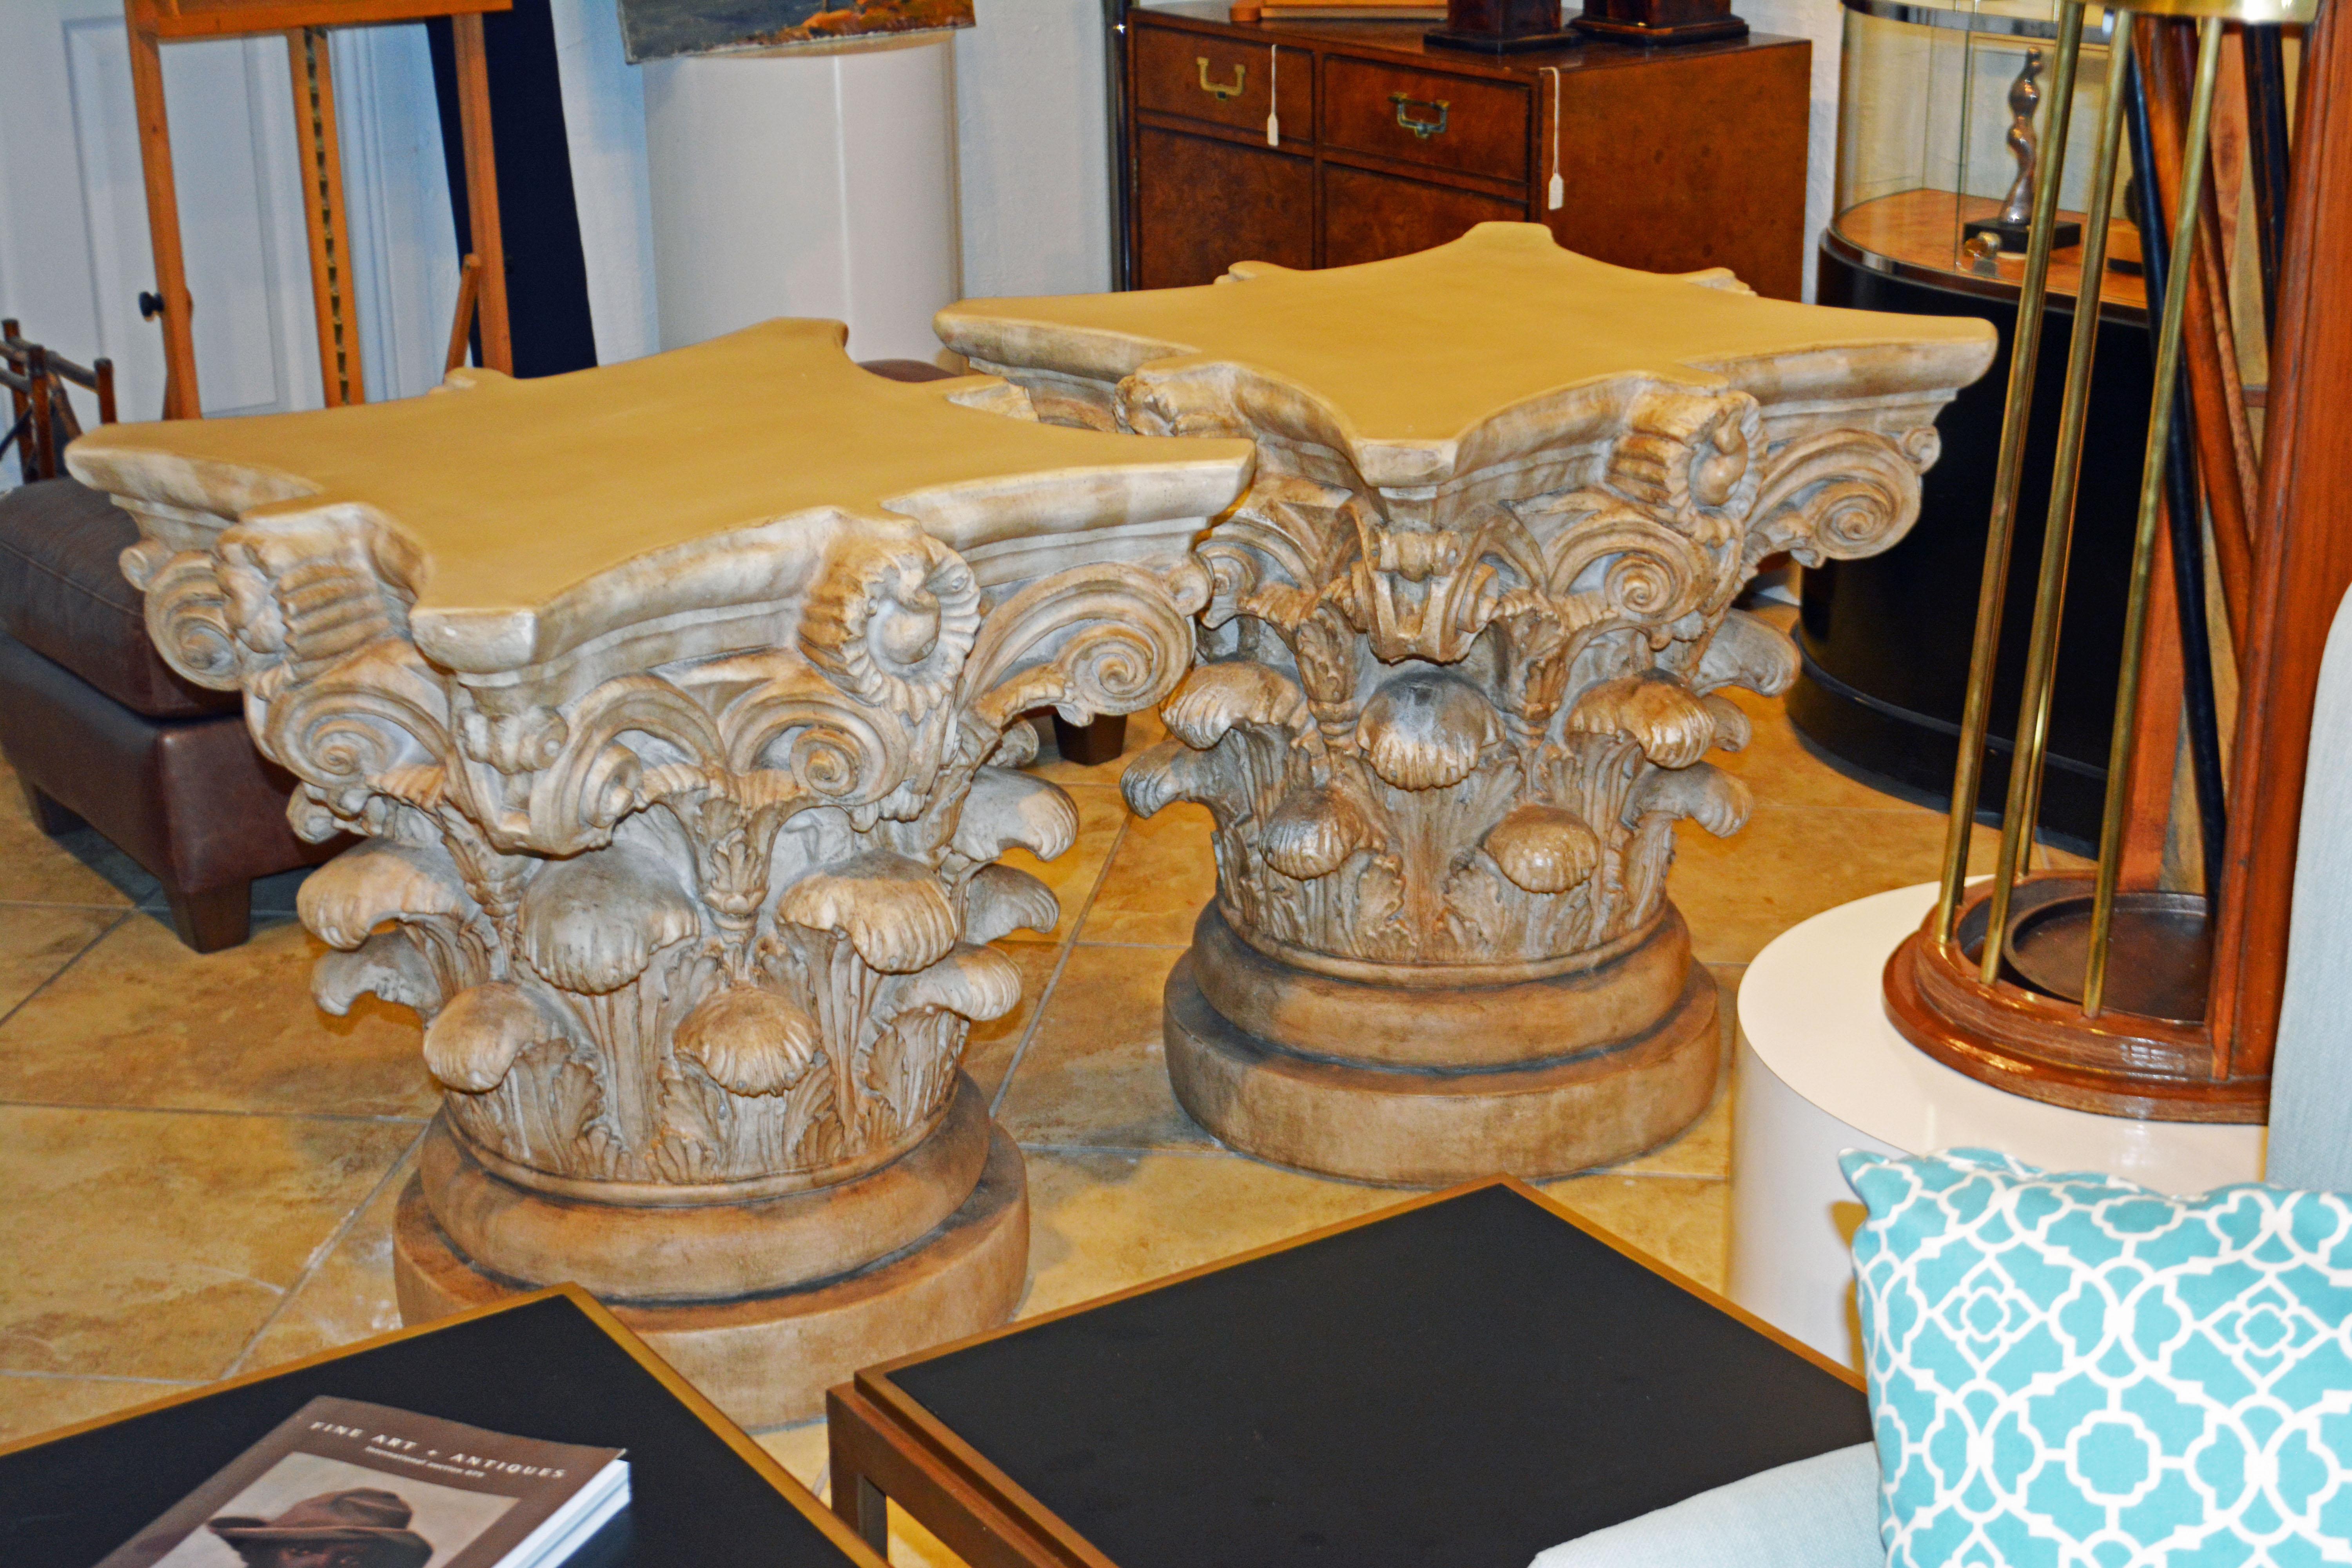 These magnificent life-size Corinthian capitals are beautifully detailed in plaster and patinated for an attractive look. The capitals likely date to the 1930s and will make impressive table bases as well as decorative sculptures. Do to the photo